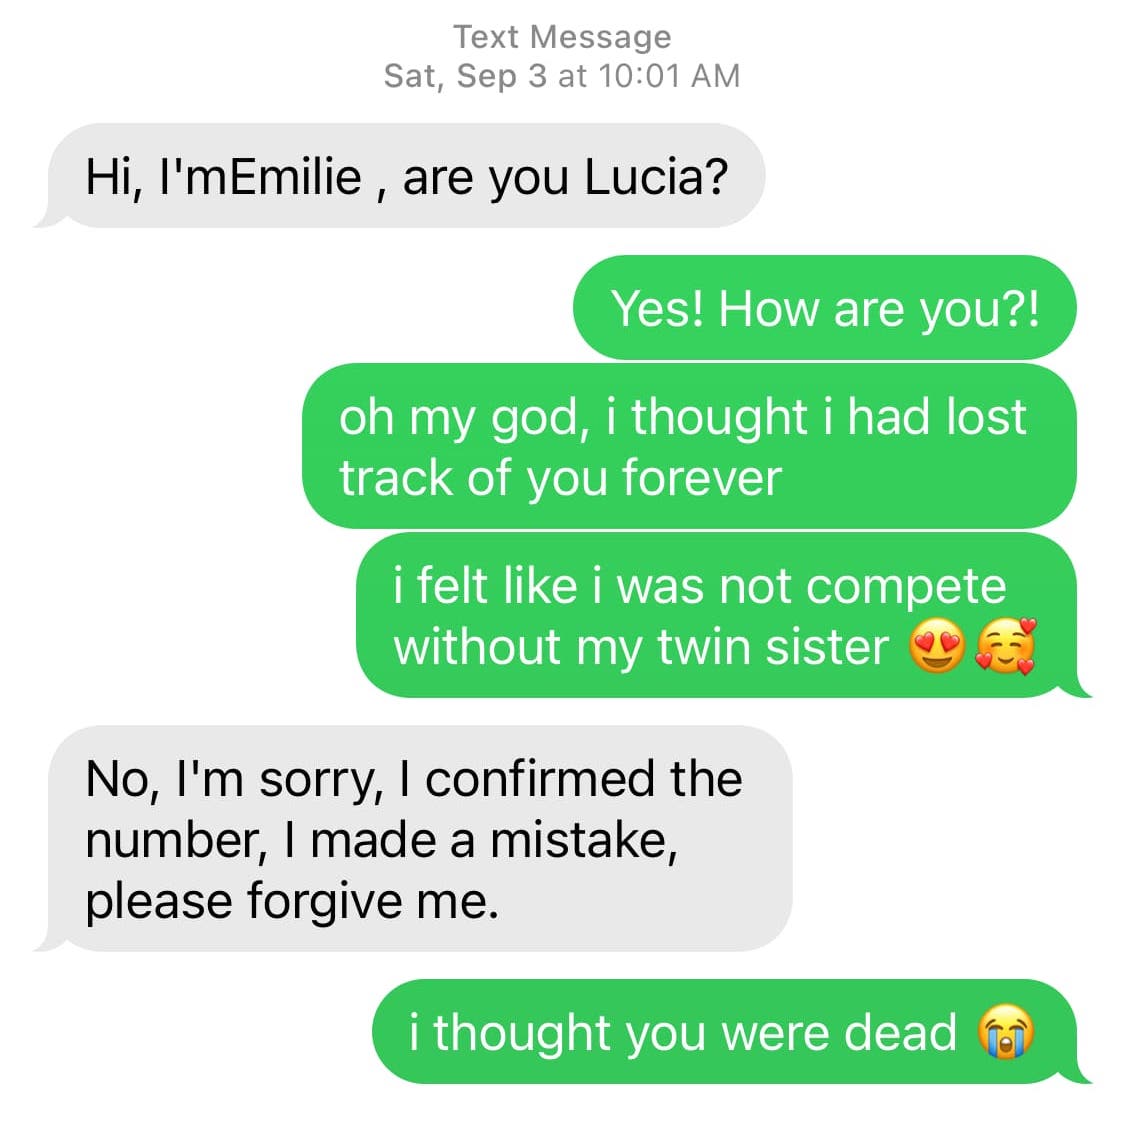 Screenshot. Them: Hi, I'm Emilie, are you Lucia? / Me: Yes! How are you?! oh my god, i thought i had lost track of you forever. i felt like i was not compete without my twin sister. / Them: No, I'm sorry, I confirmed the number, I made a mistake, please forgive me. / Me: i thought you were dead 